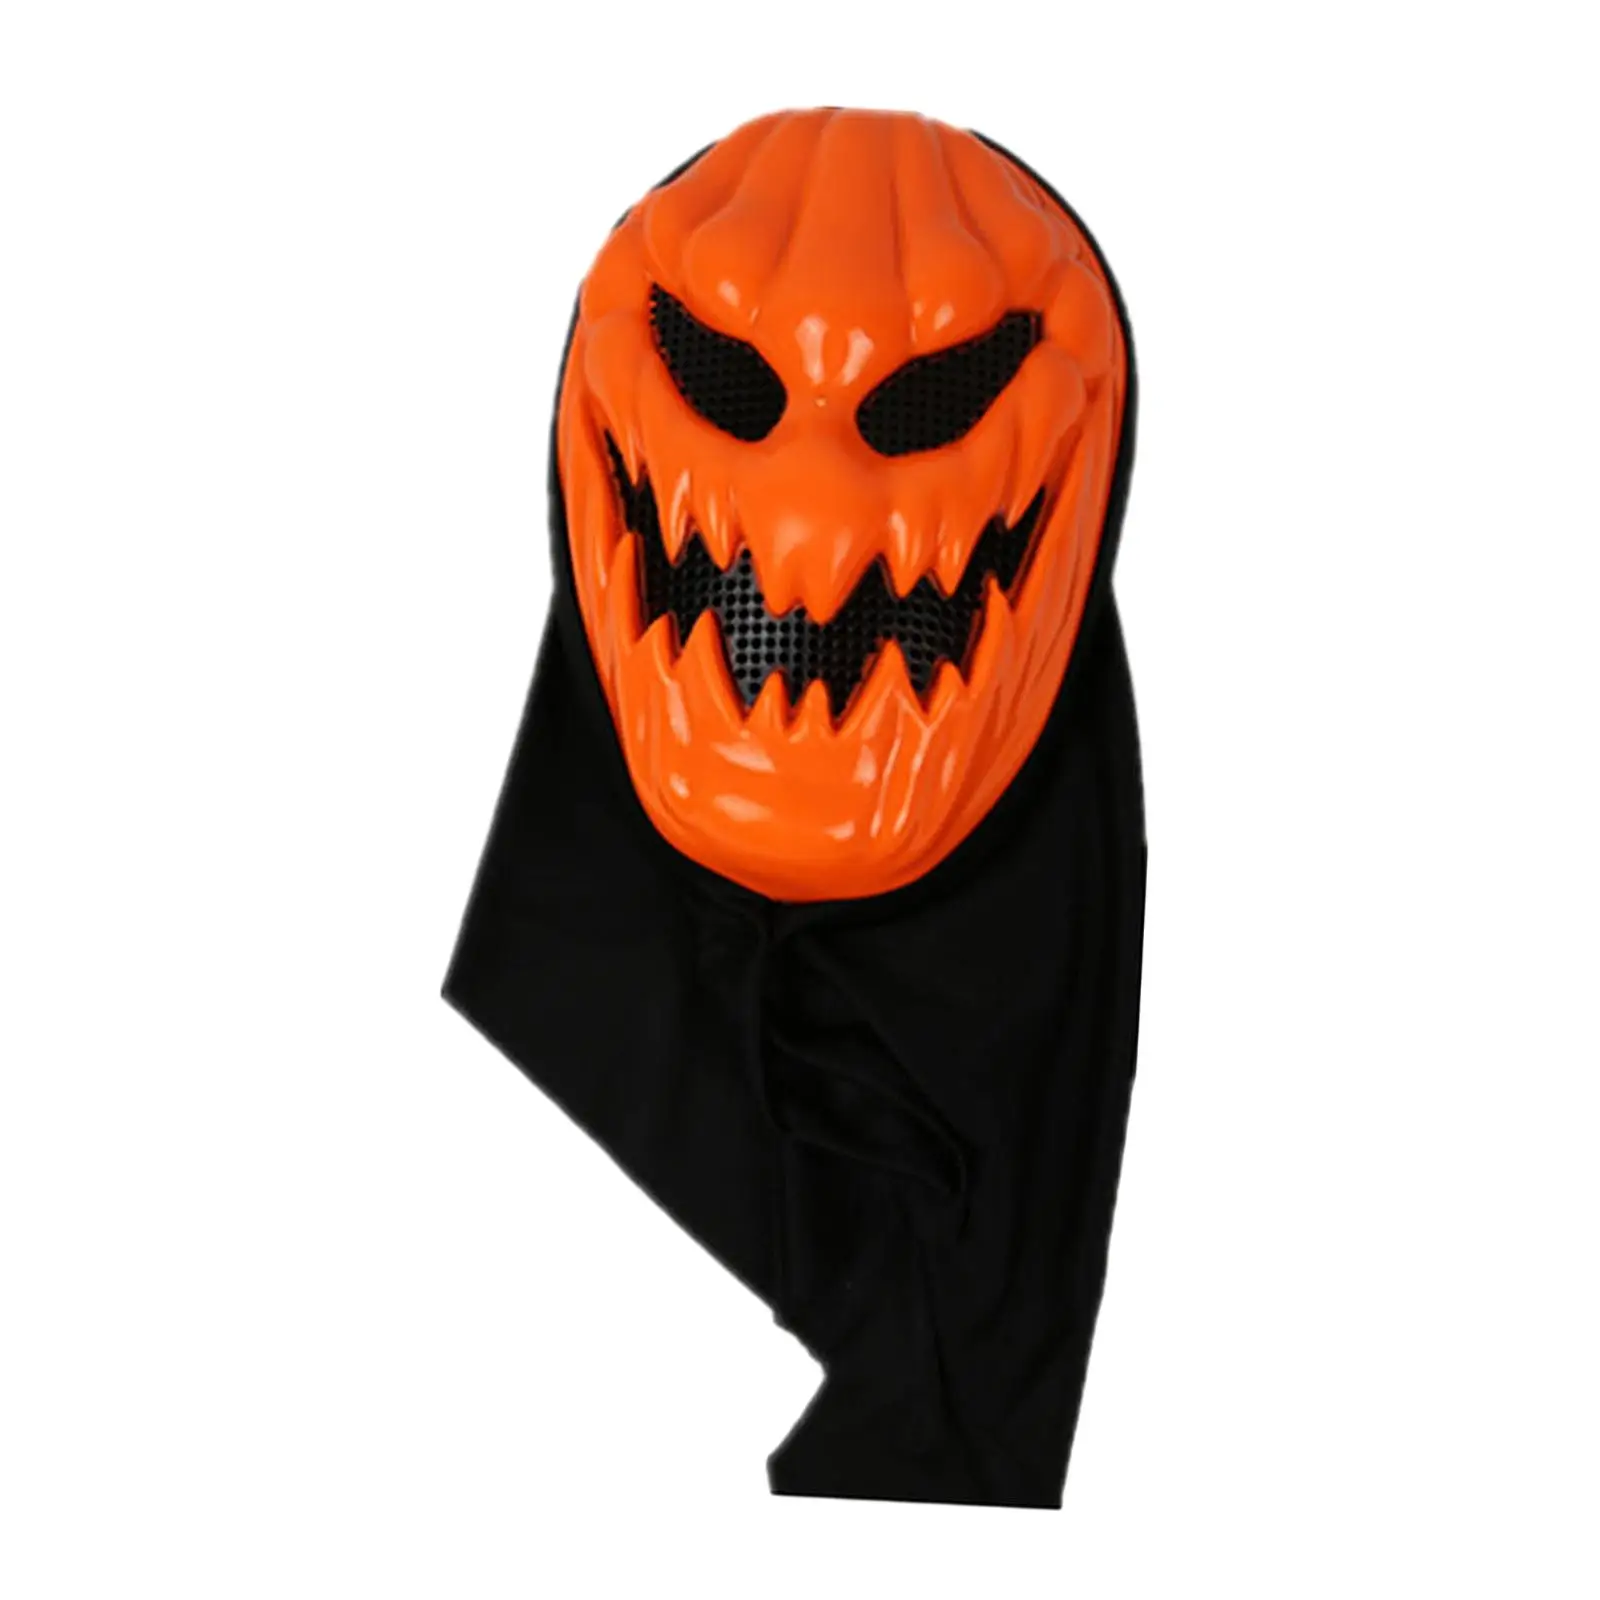 Halloween Pumpkin Head Mask Props Scary Costume Accessories for Carnival Stage Performances Haunted House Masquerade Fancy Dress